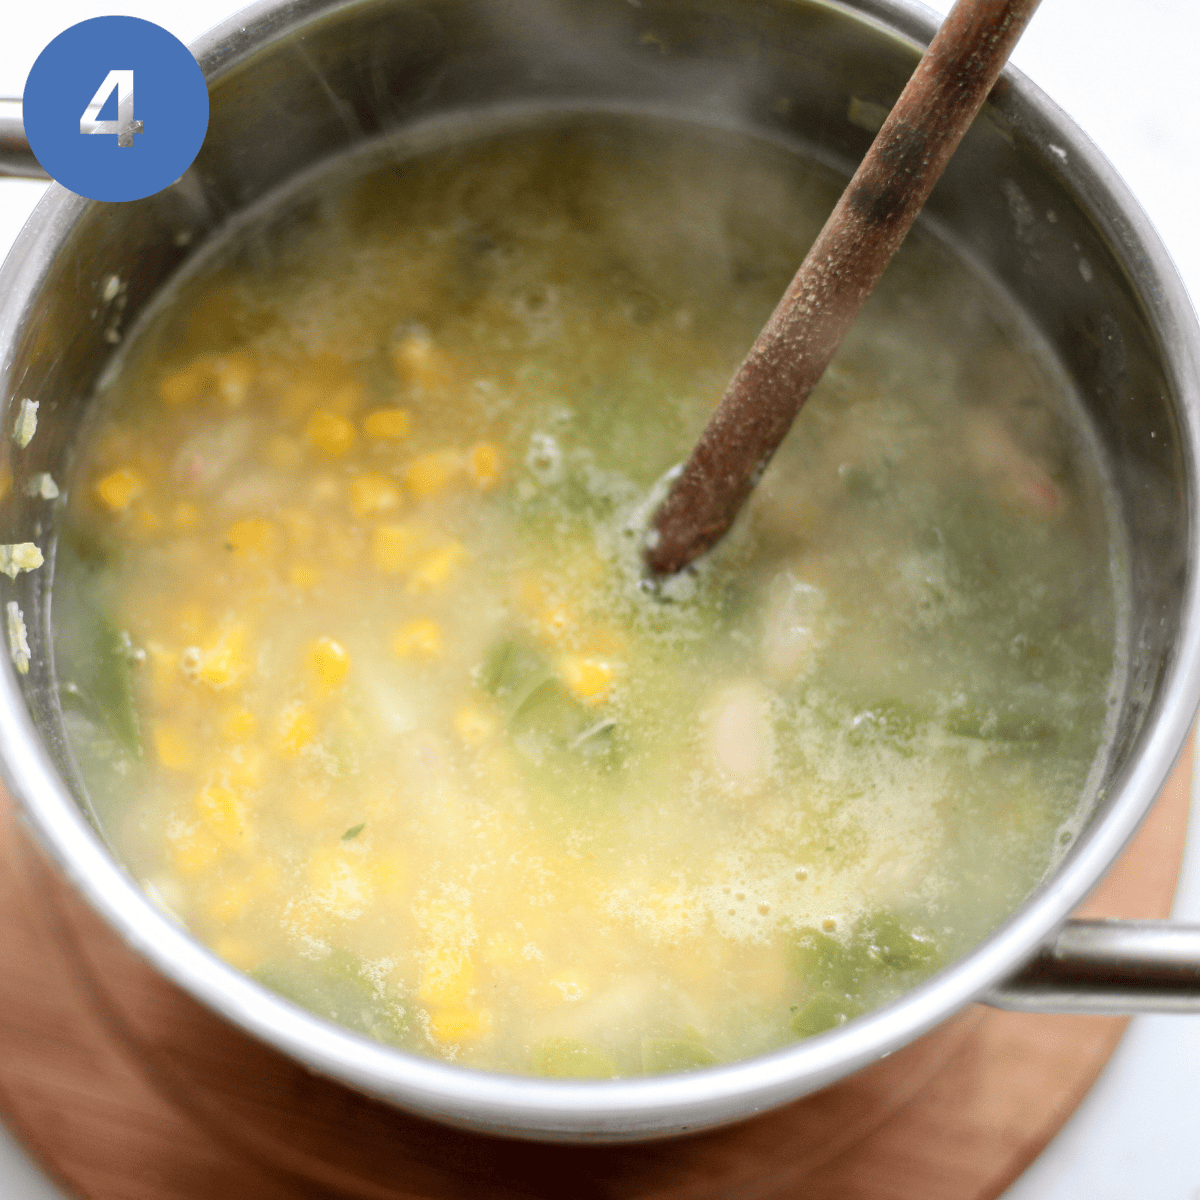 Adding the corn and beans to the chowder.